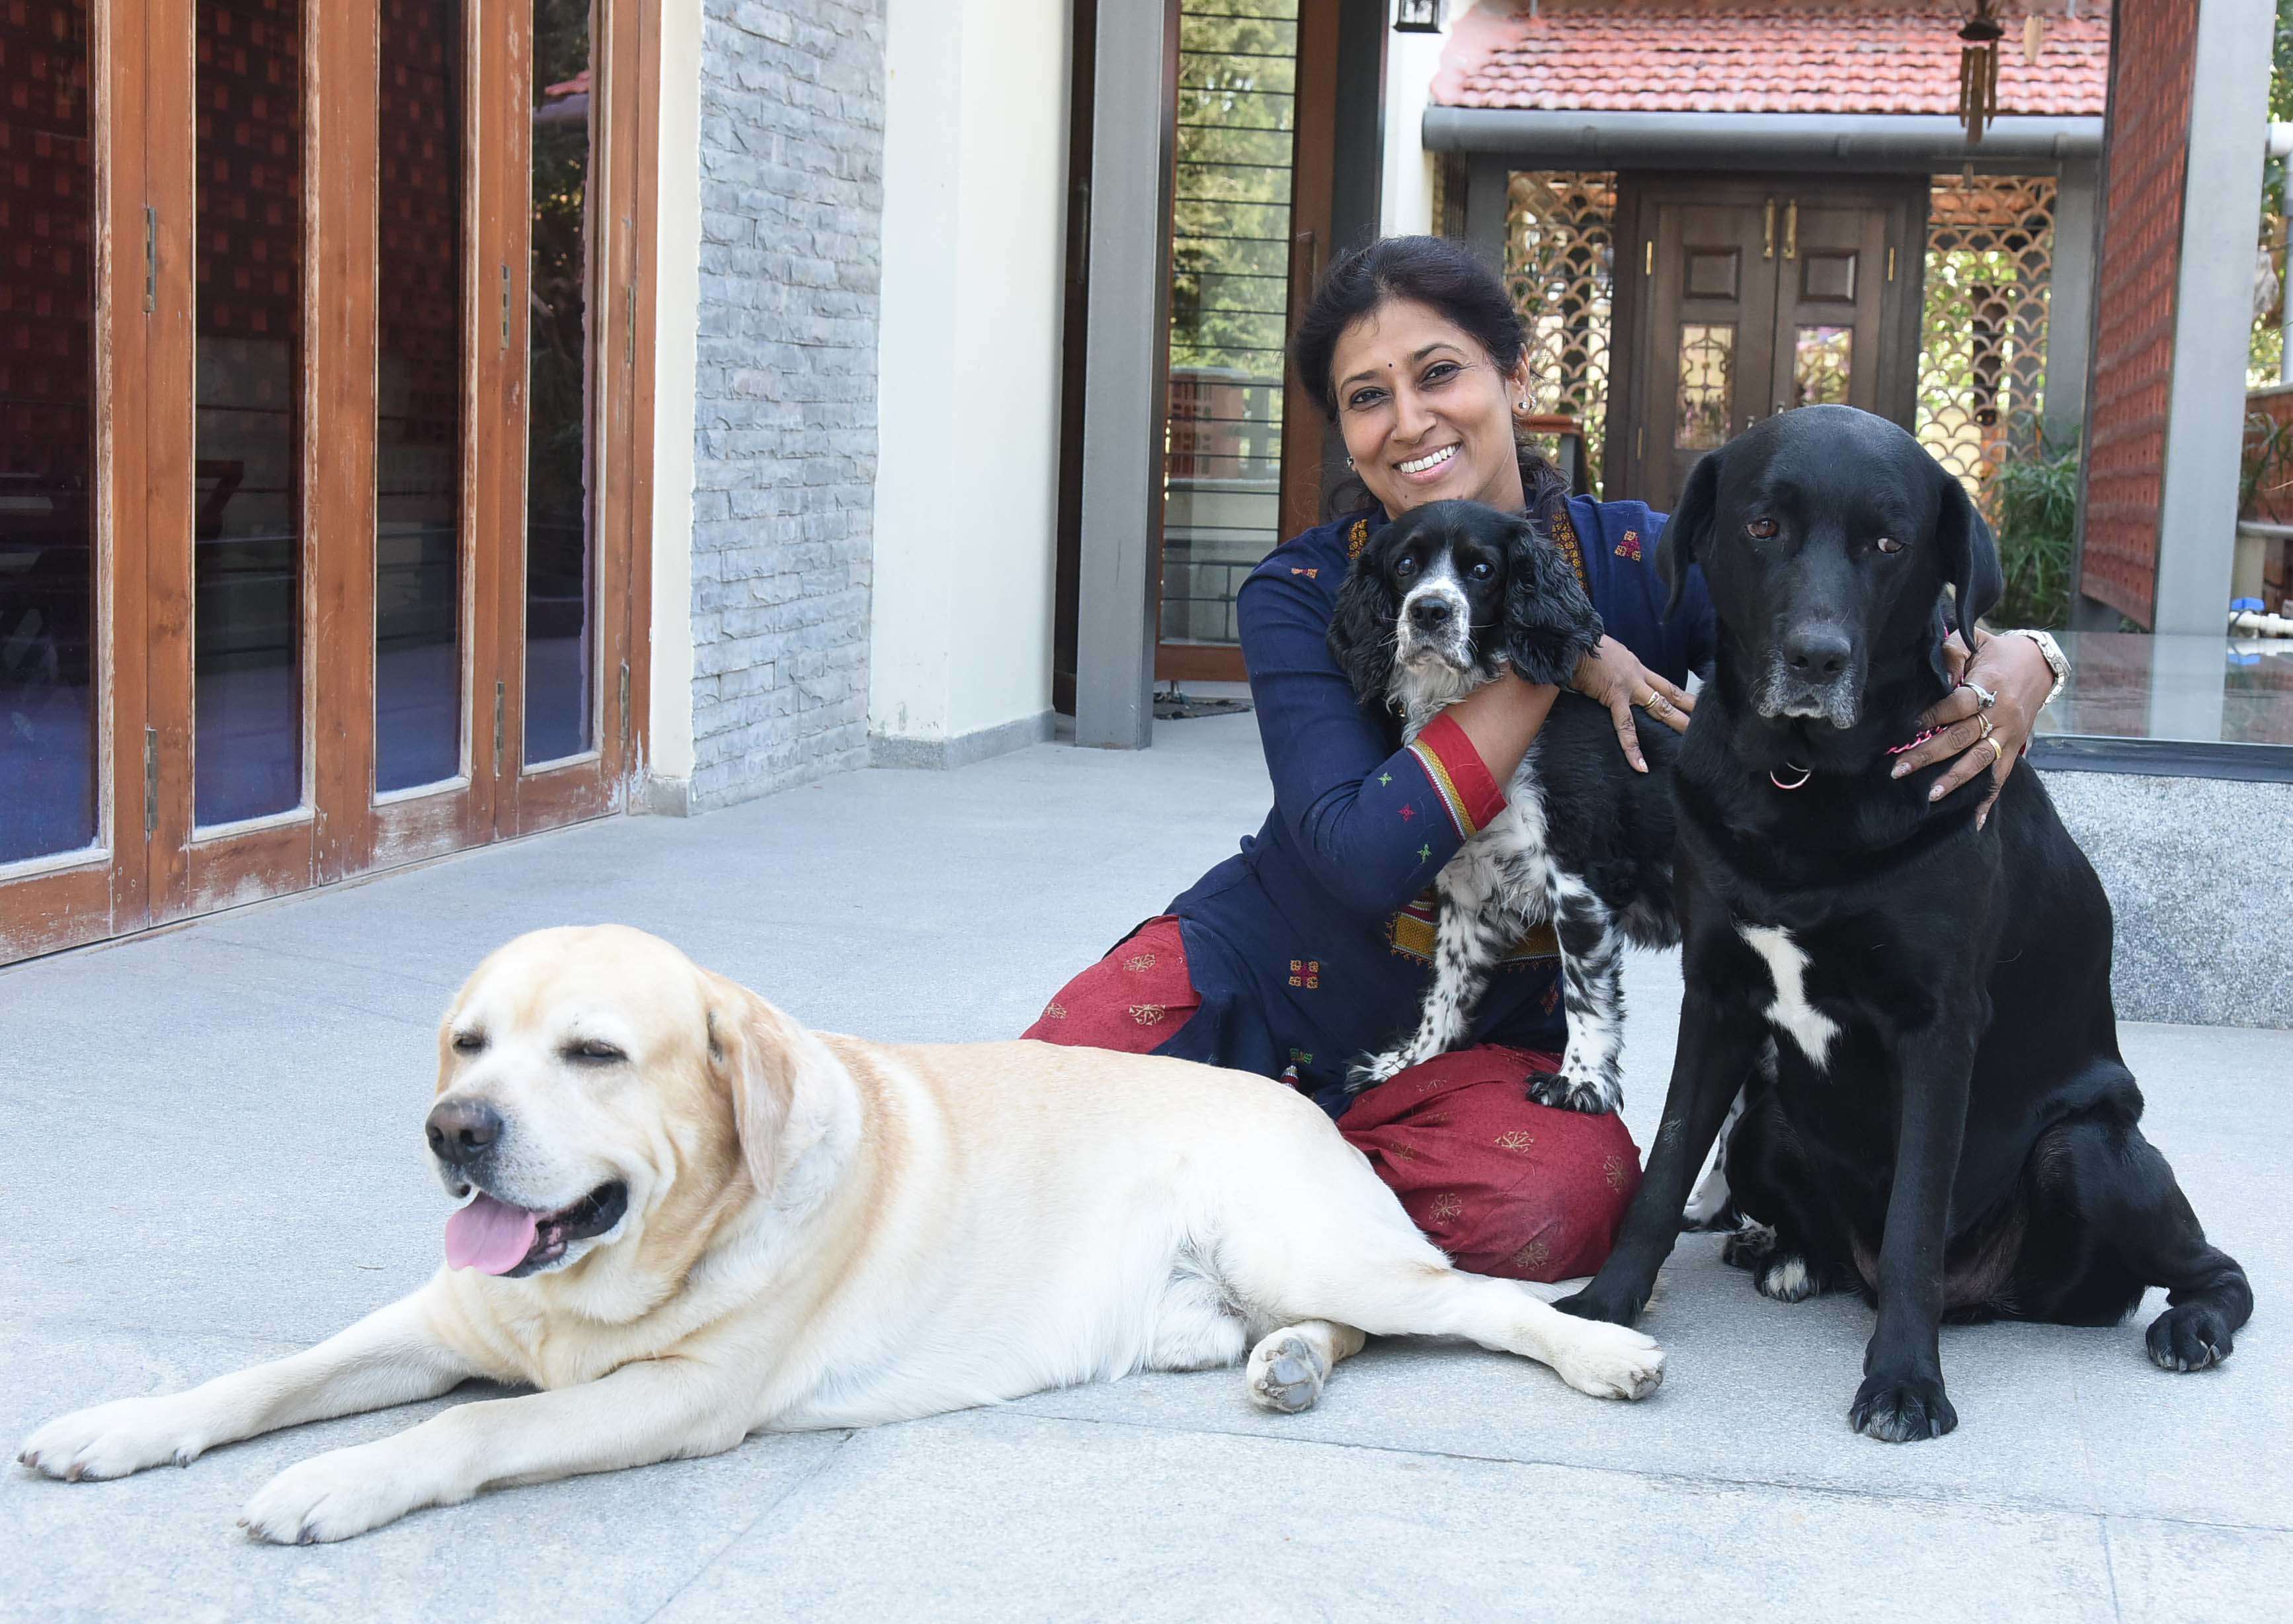 Can pets talk? Yes, say these animal communicators - Times of India